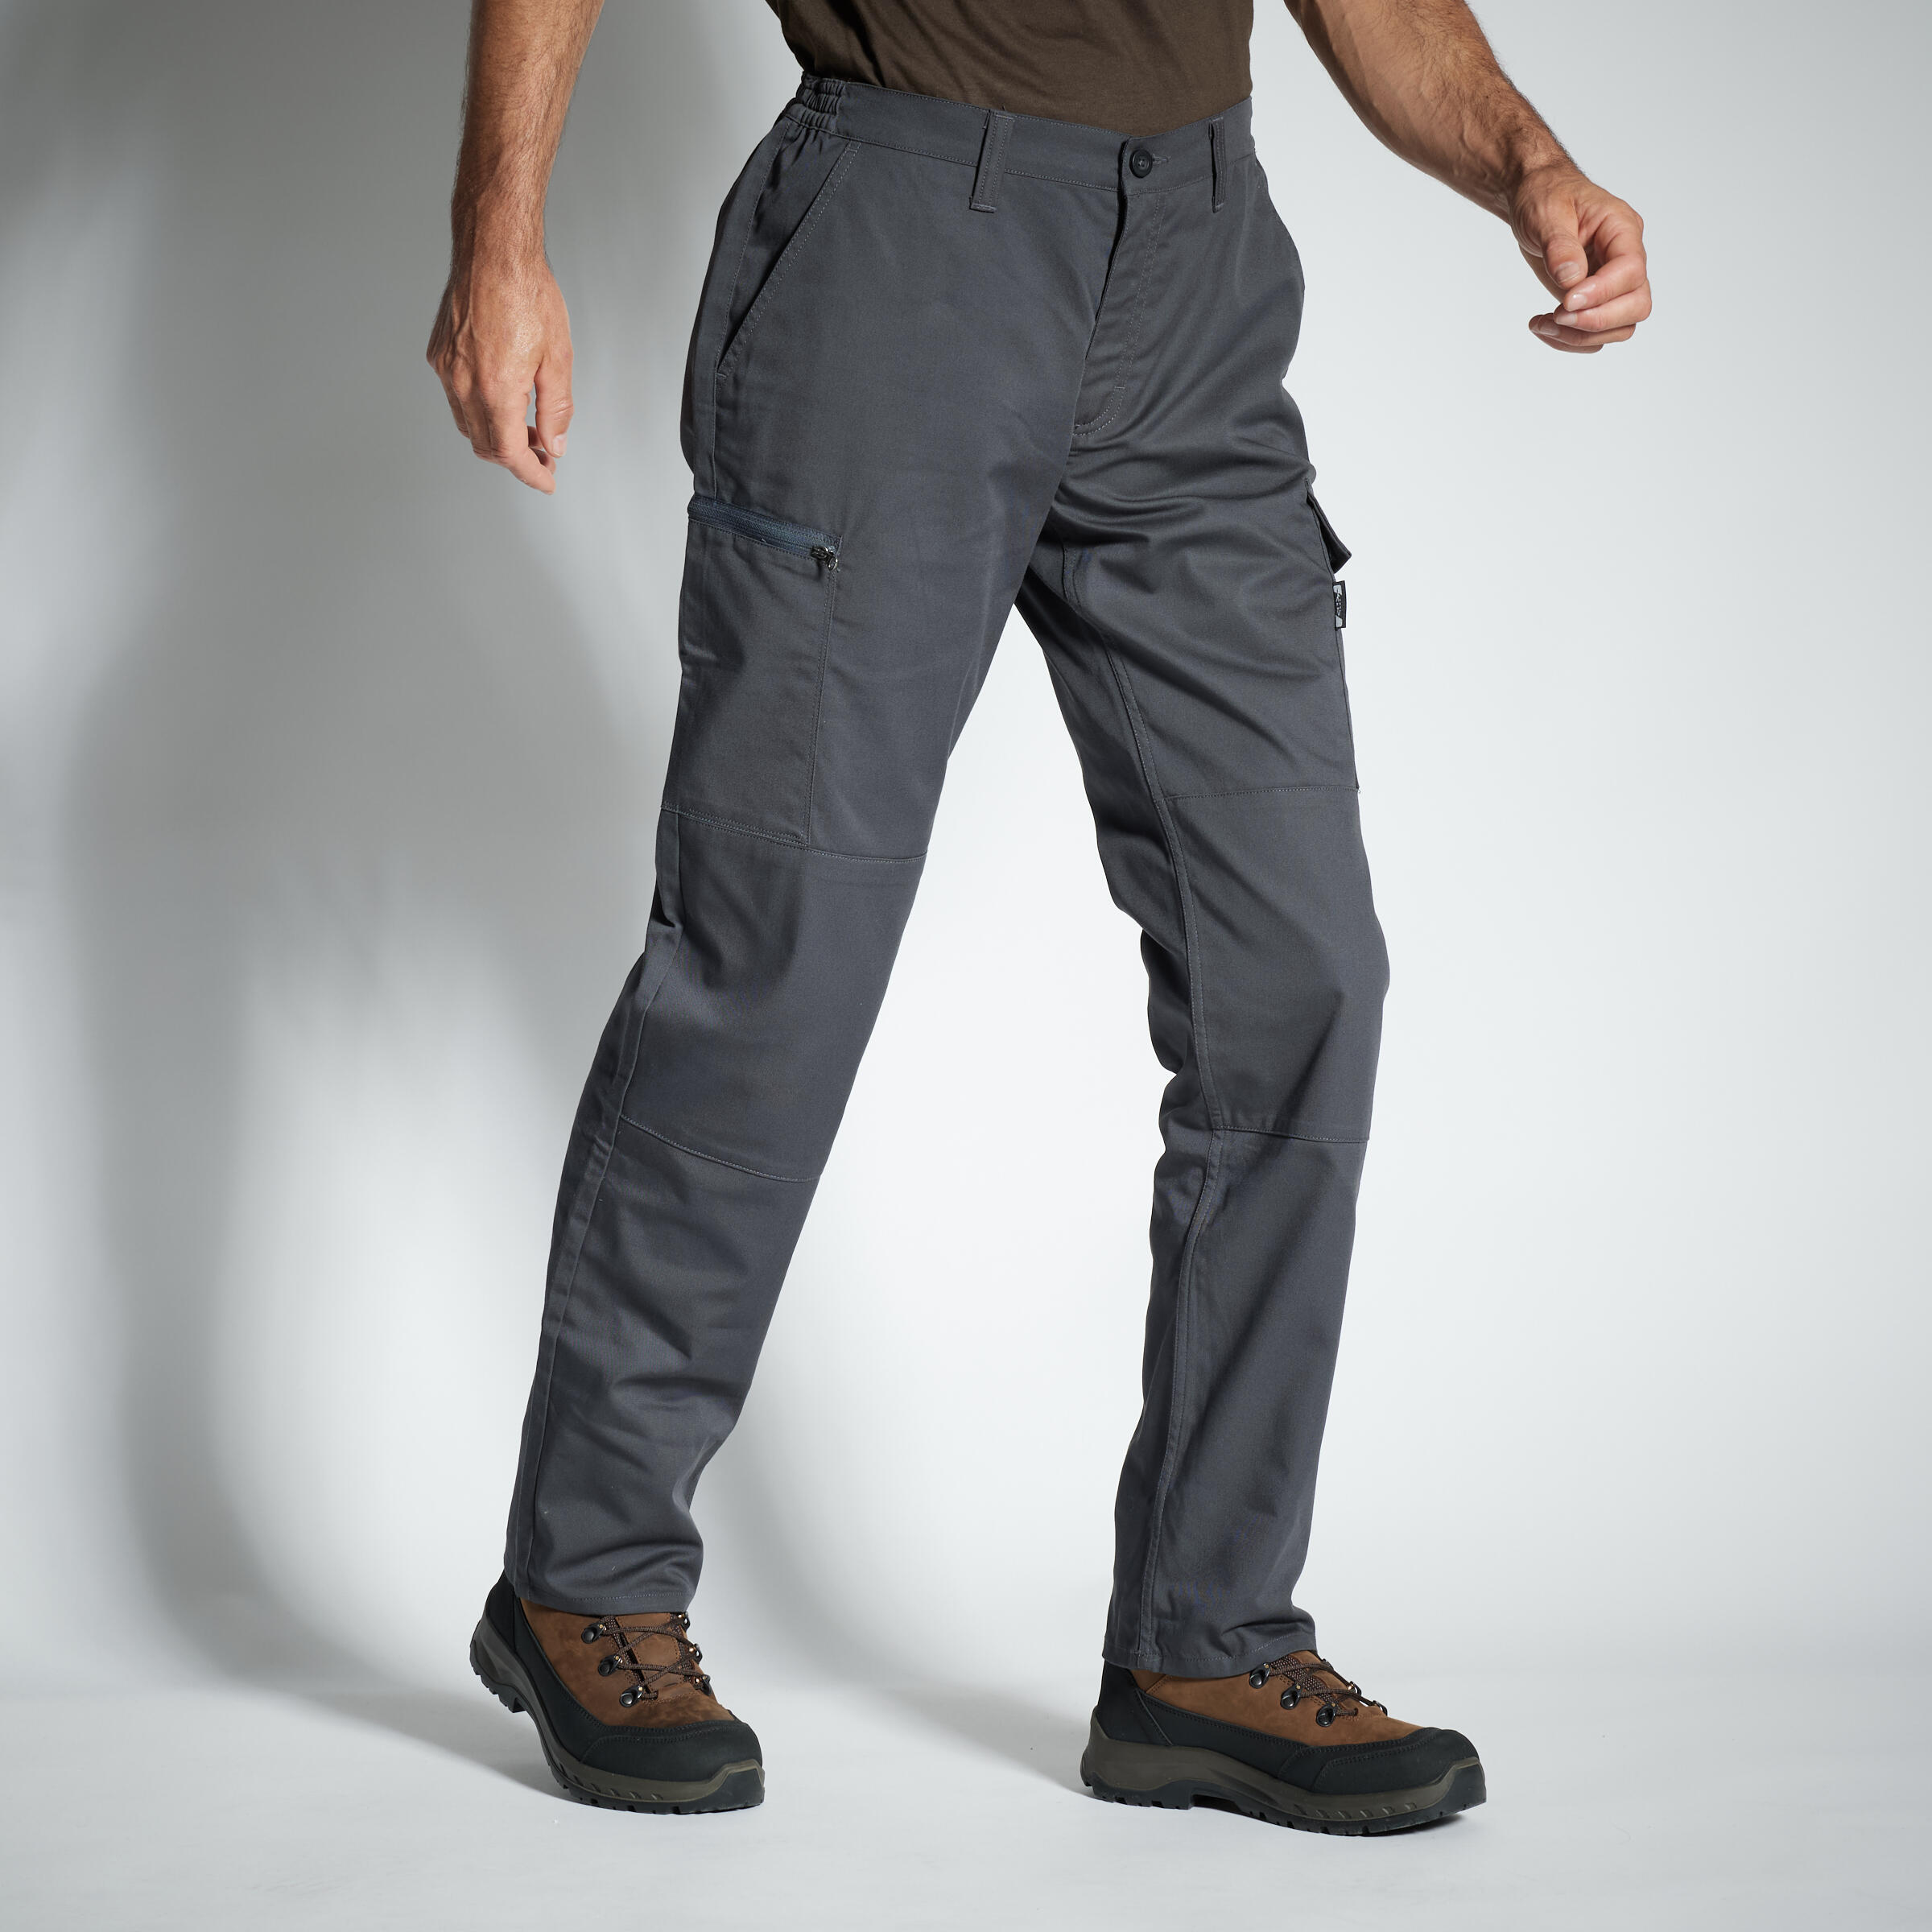 durable cargo trousers steppe 300 grey solognac 8185287